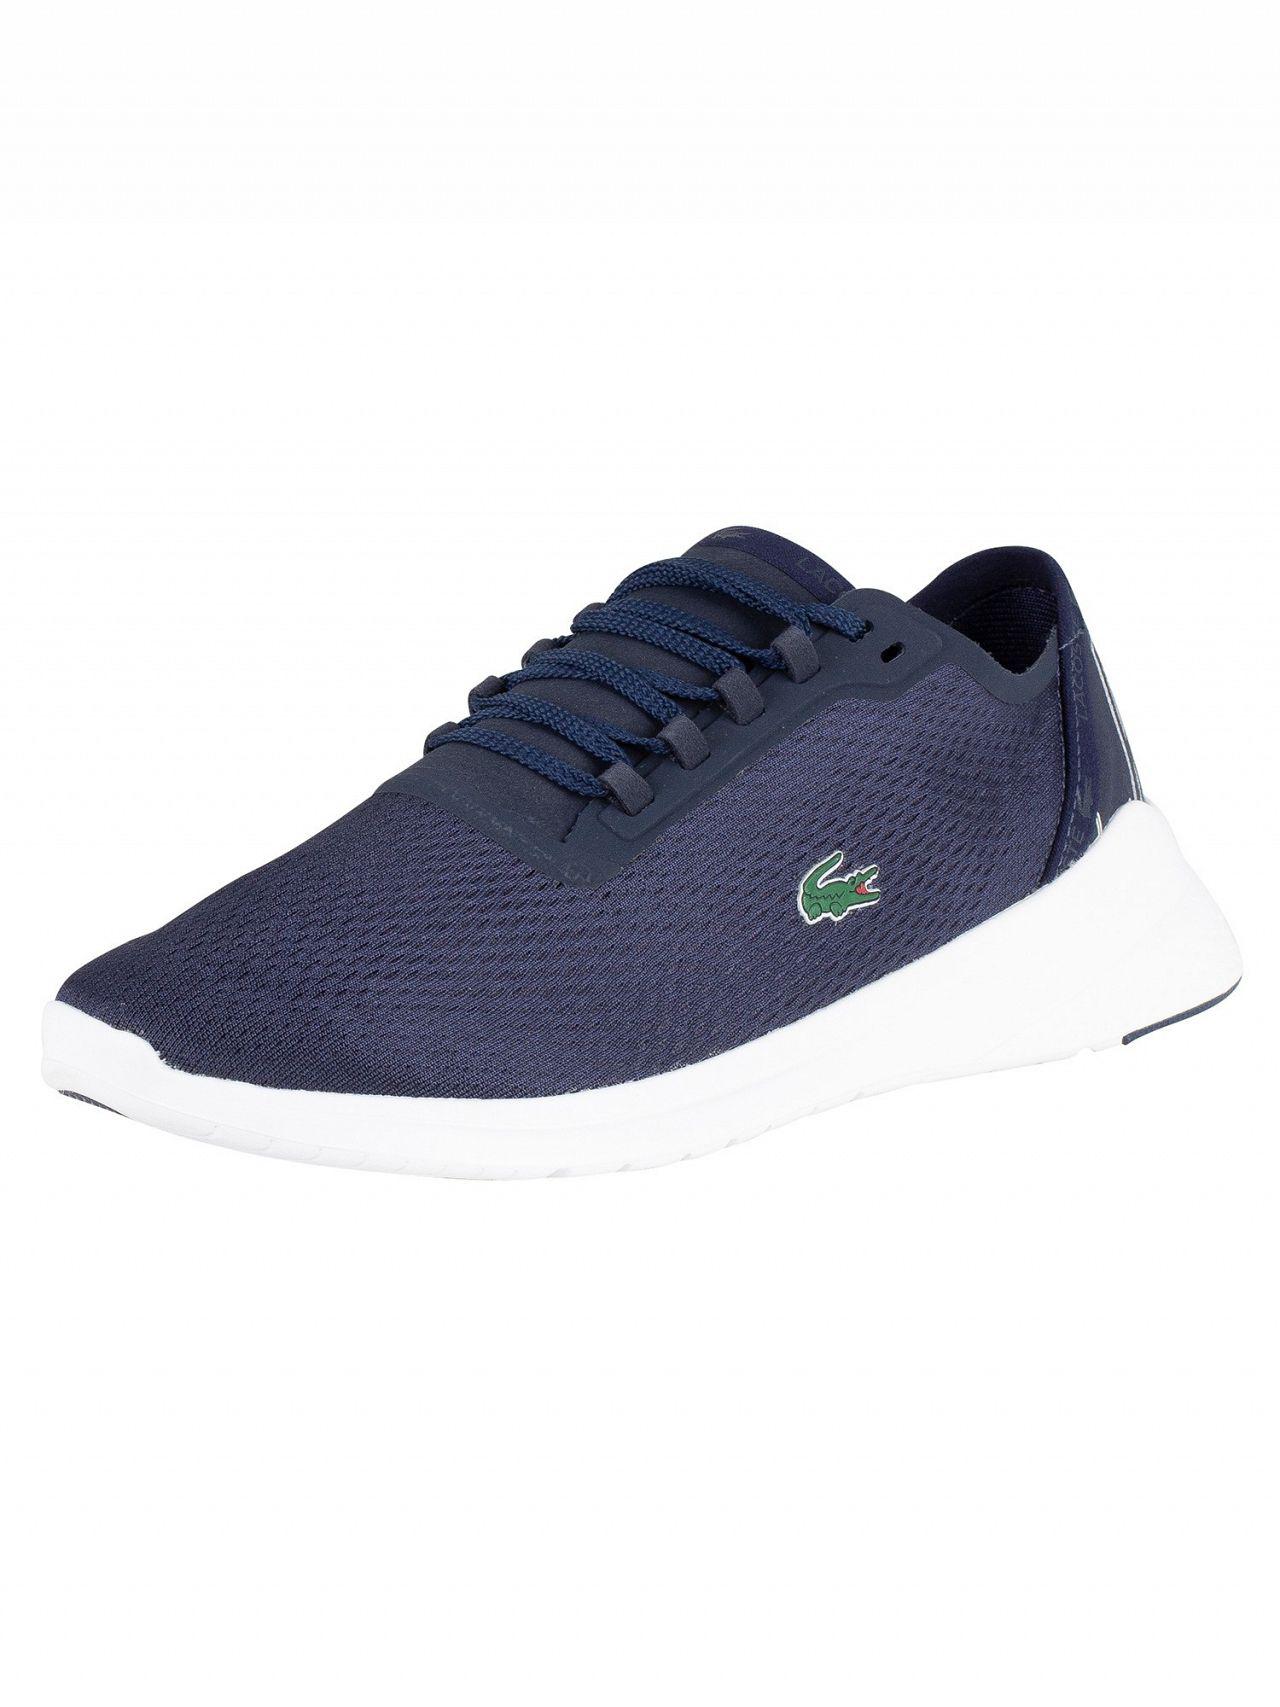 lacoste lt fit 119 Off 72% - www.electroparedes.pt